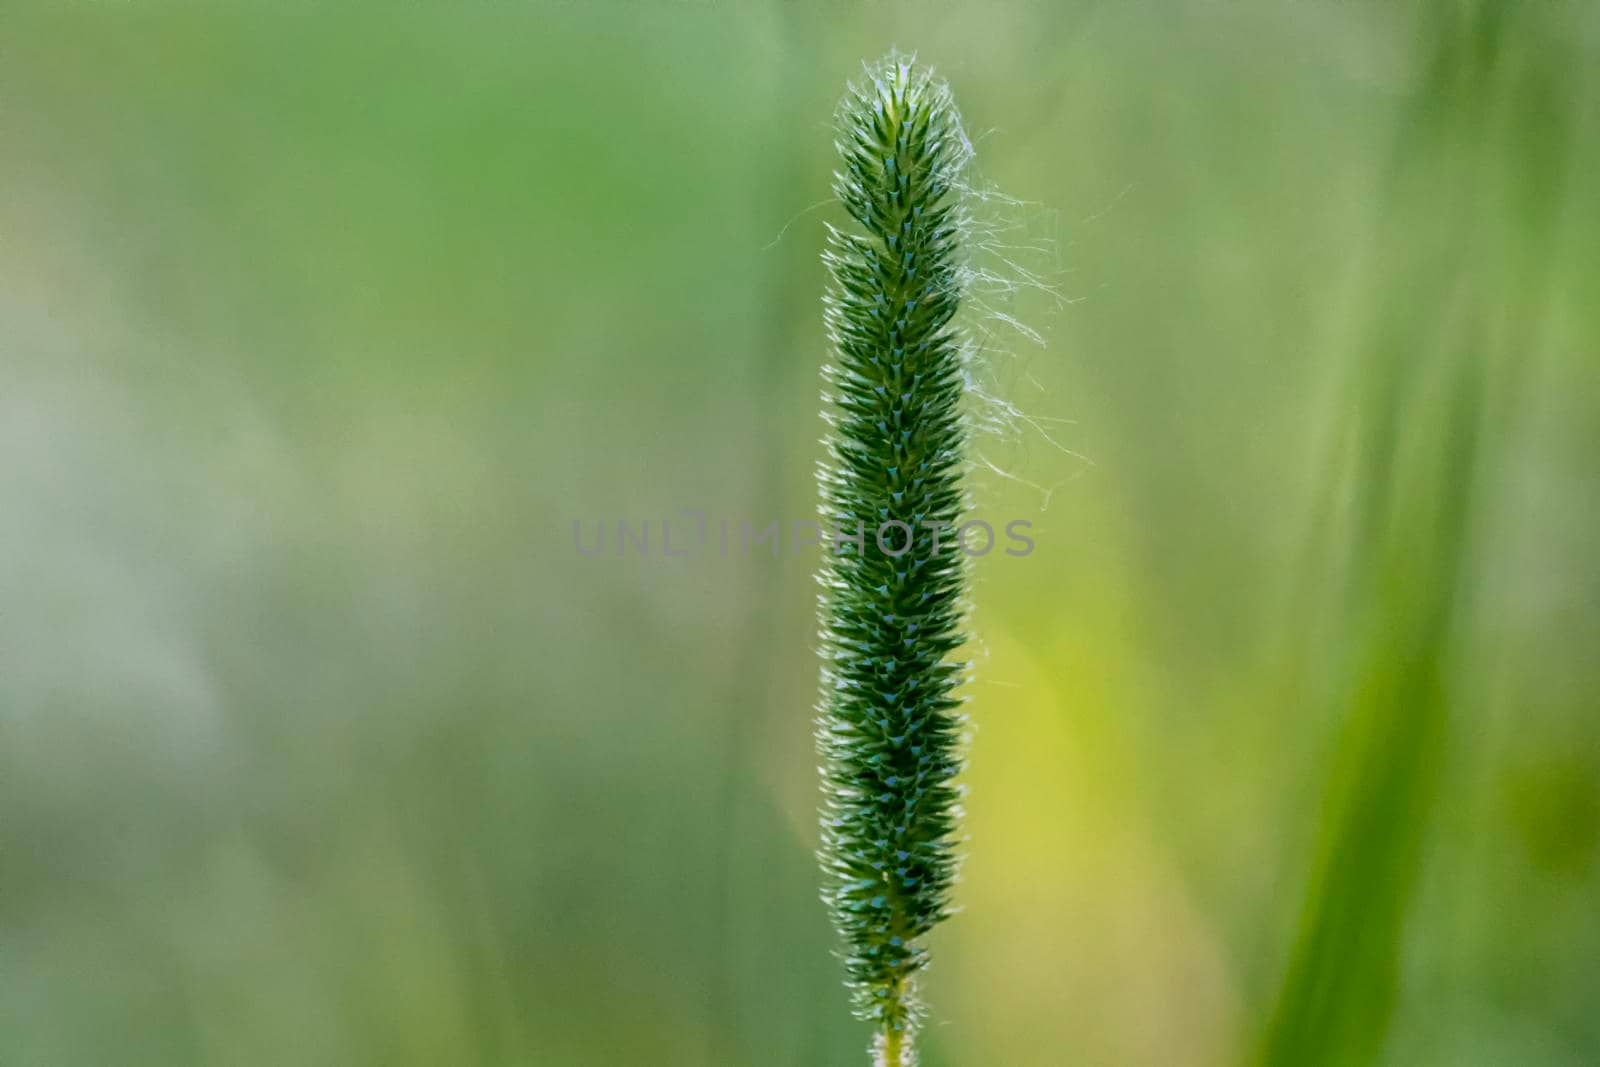 A green spike of weed on a light green background.